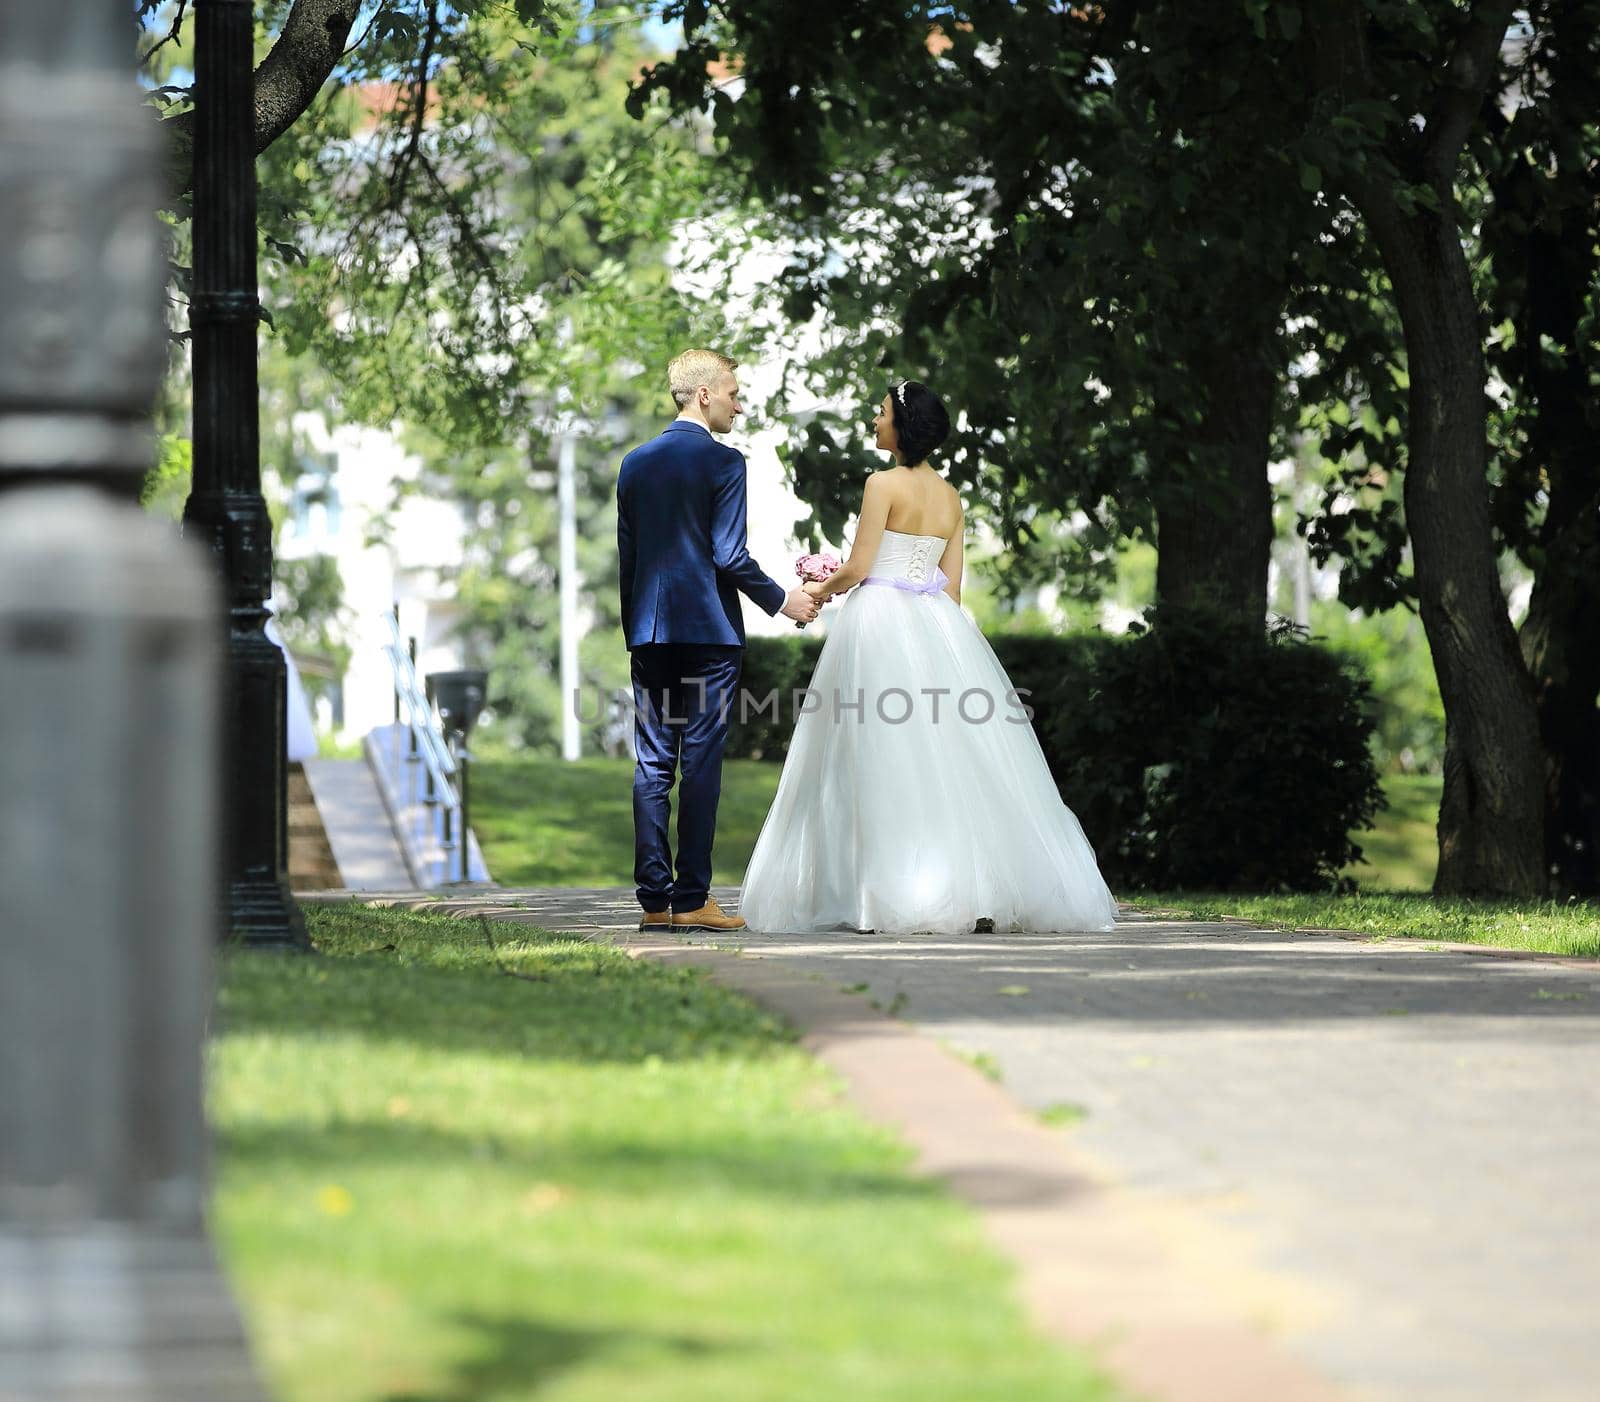 rear view.back groom and bride walking along the alley on the background of trees